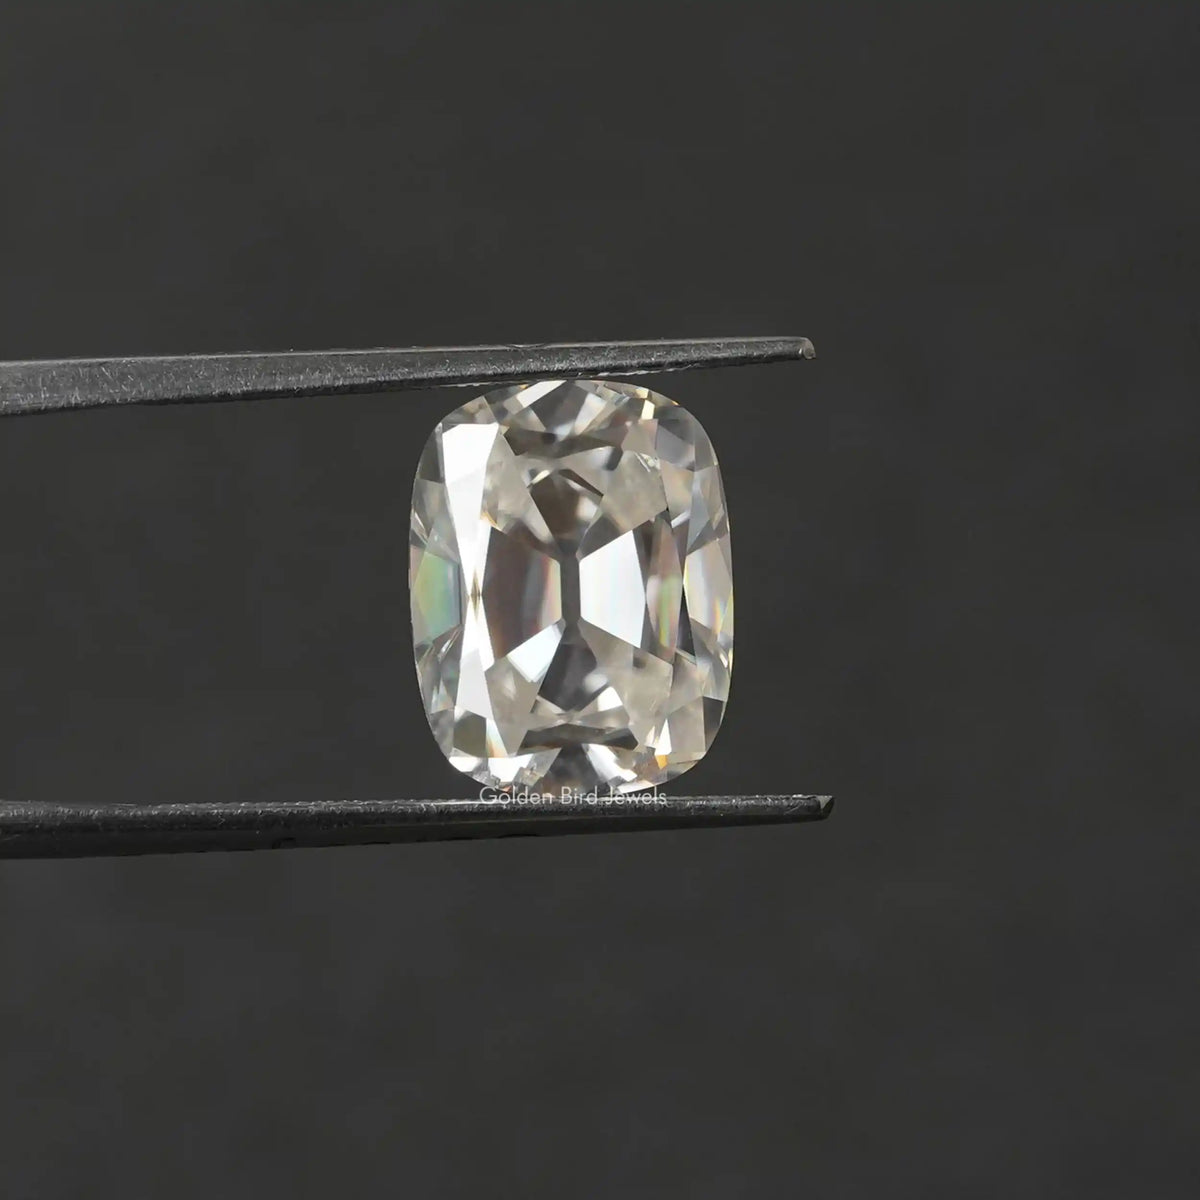 [In twizzer front view of cushion cut loose moissanite]-[Golden Bird Jewels]